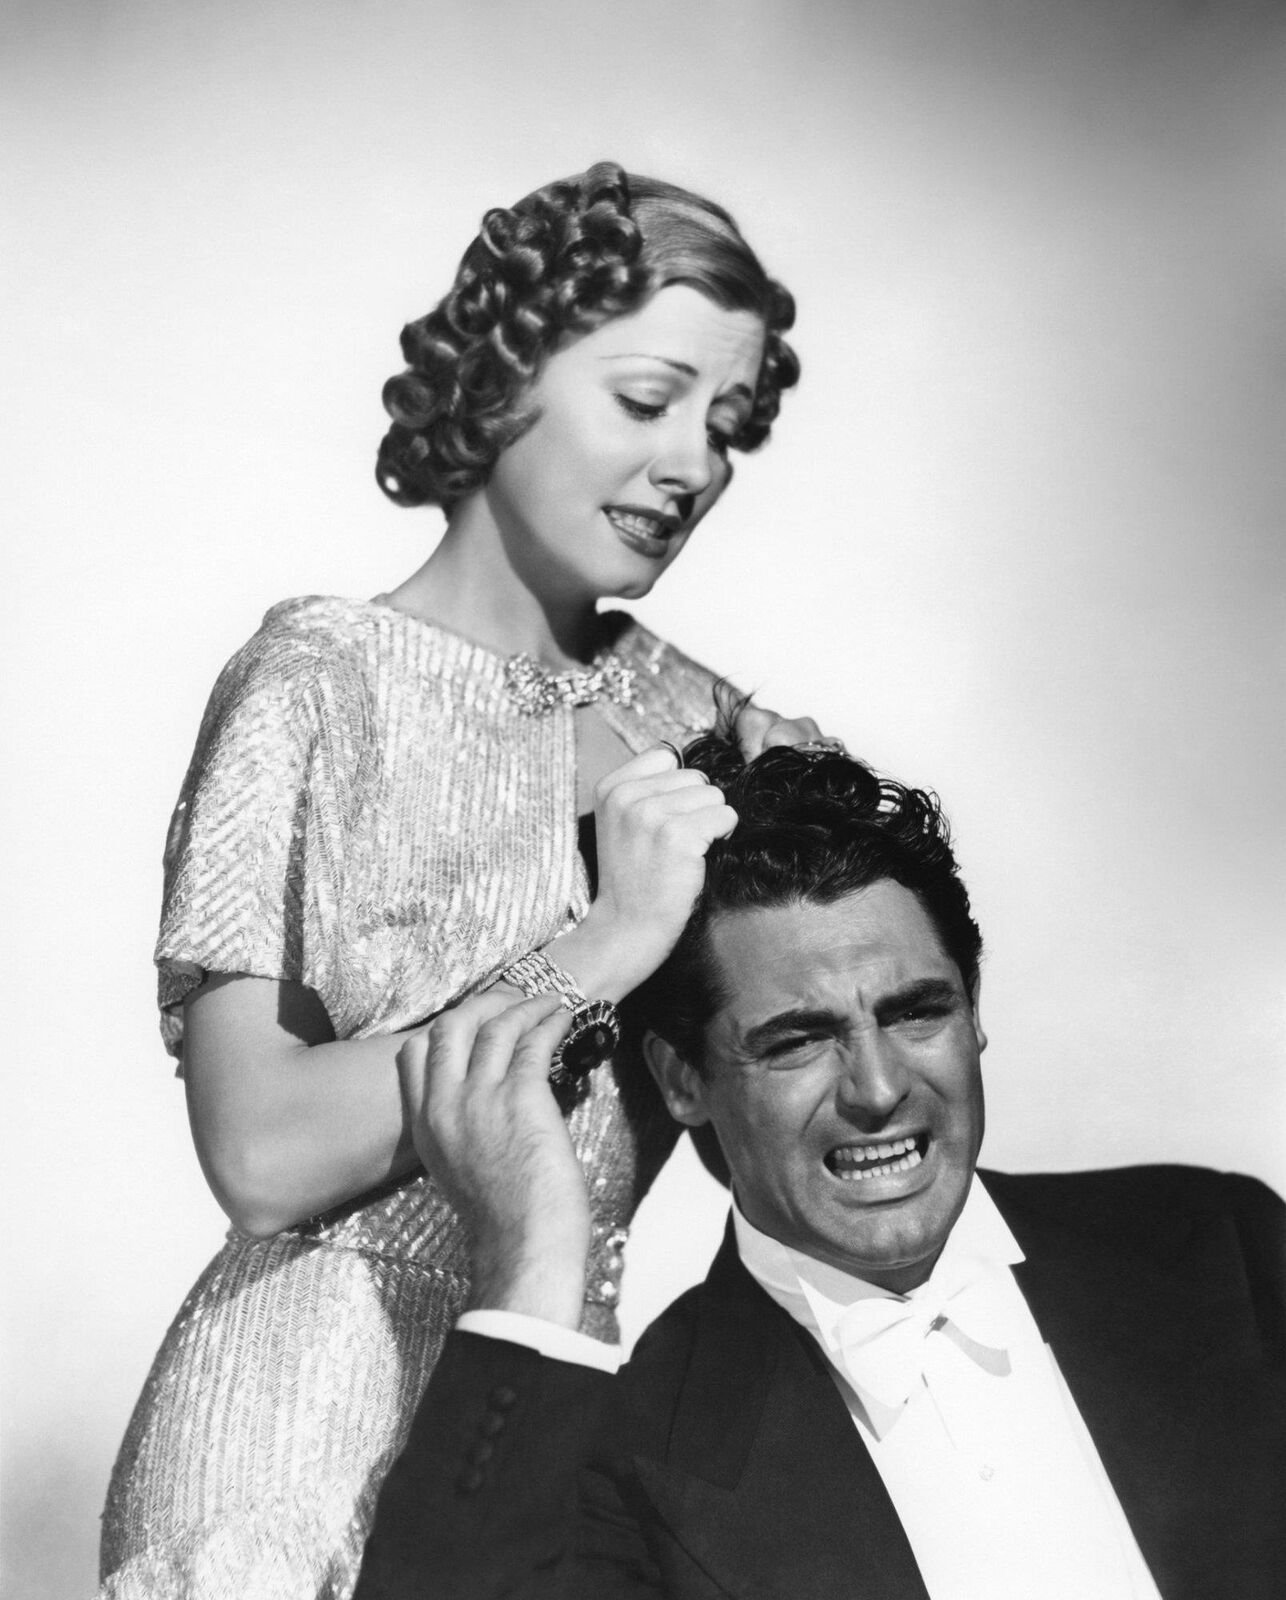 1937 CARY GRANT and IRENE DUNNE in THE AWFUL TRUTH Photo (213-Z )